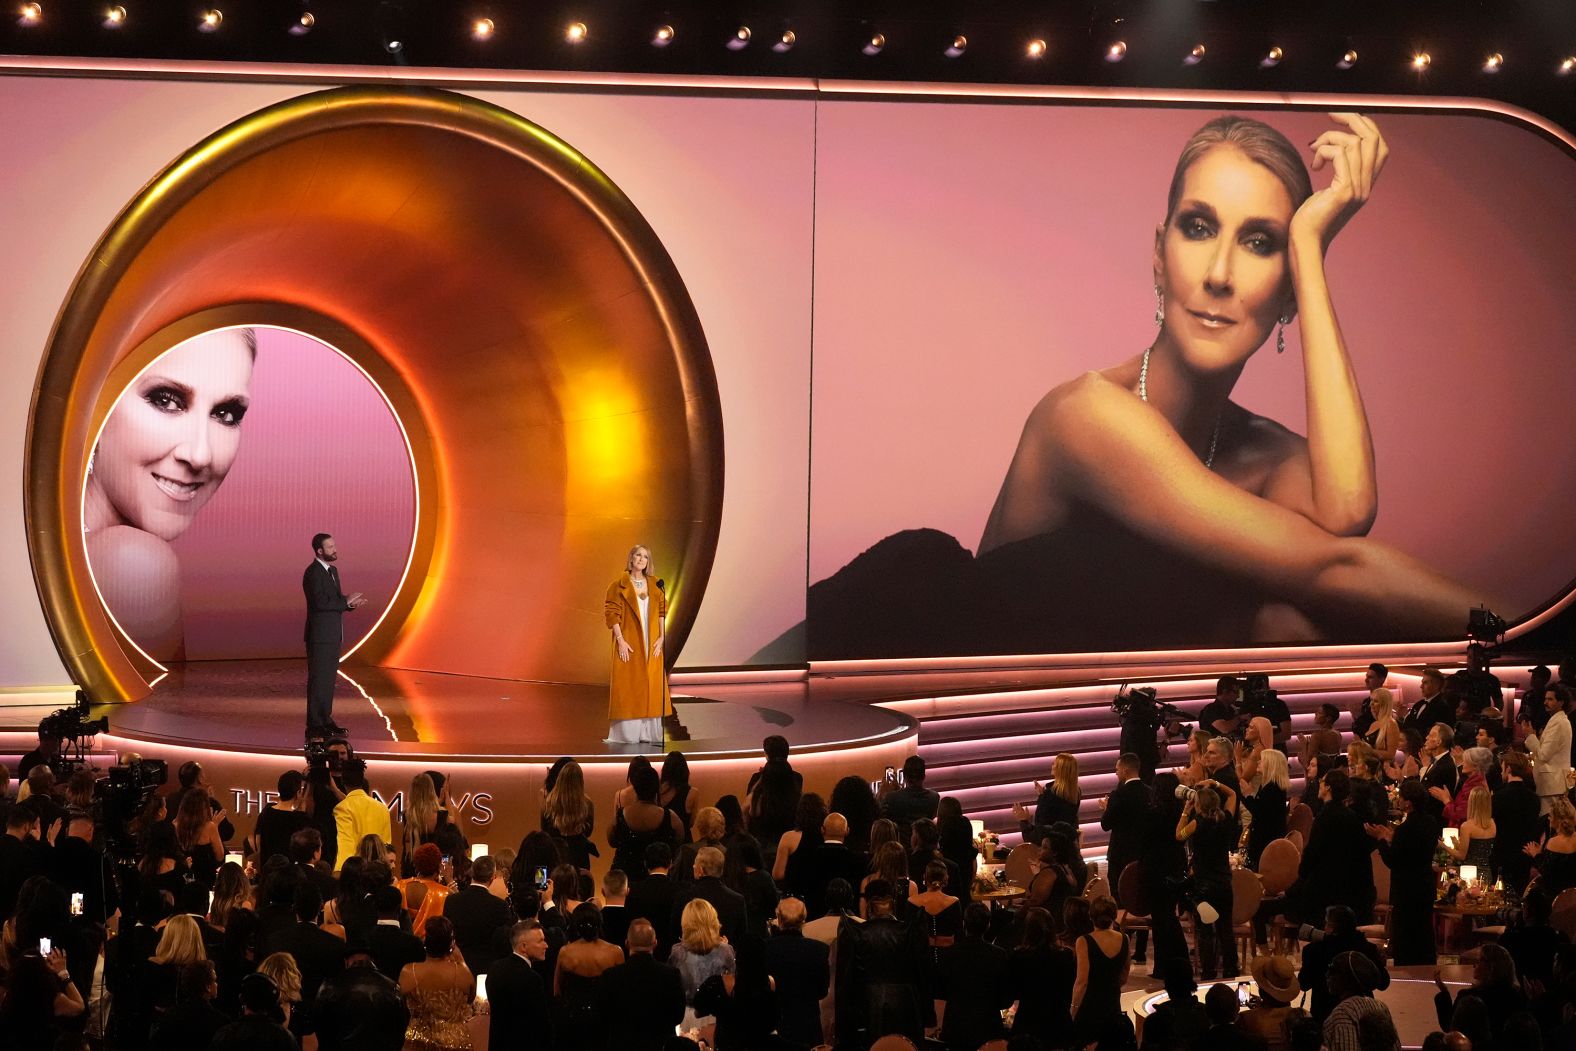 Celine Dion, <a href="index.php?page=&url=https%3A%2F%2Fwww.cnn.com%2F2024%2F01%2F30%2Fentertainment%2Fceline-dion-new-doc-stiff-person%2Findex.html">whose performing career remains on hold</a> as she lives with stiff person syndrome, a rare neurological disorder, presents the Grammy for album of the year. “When I say that I’m happy to be here, I really mean it from my heart,” <a href="index.php?page=&url=https%3A%2F%2Fwww.cnn.com%2F2024%2F02%2F04%2Fentertainment%2Fceline-dion-surprise-grammys-presenter%2Findex.html">Dion said after she took to the stage to roaring applause</a>.